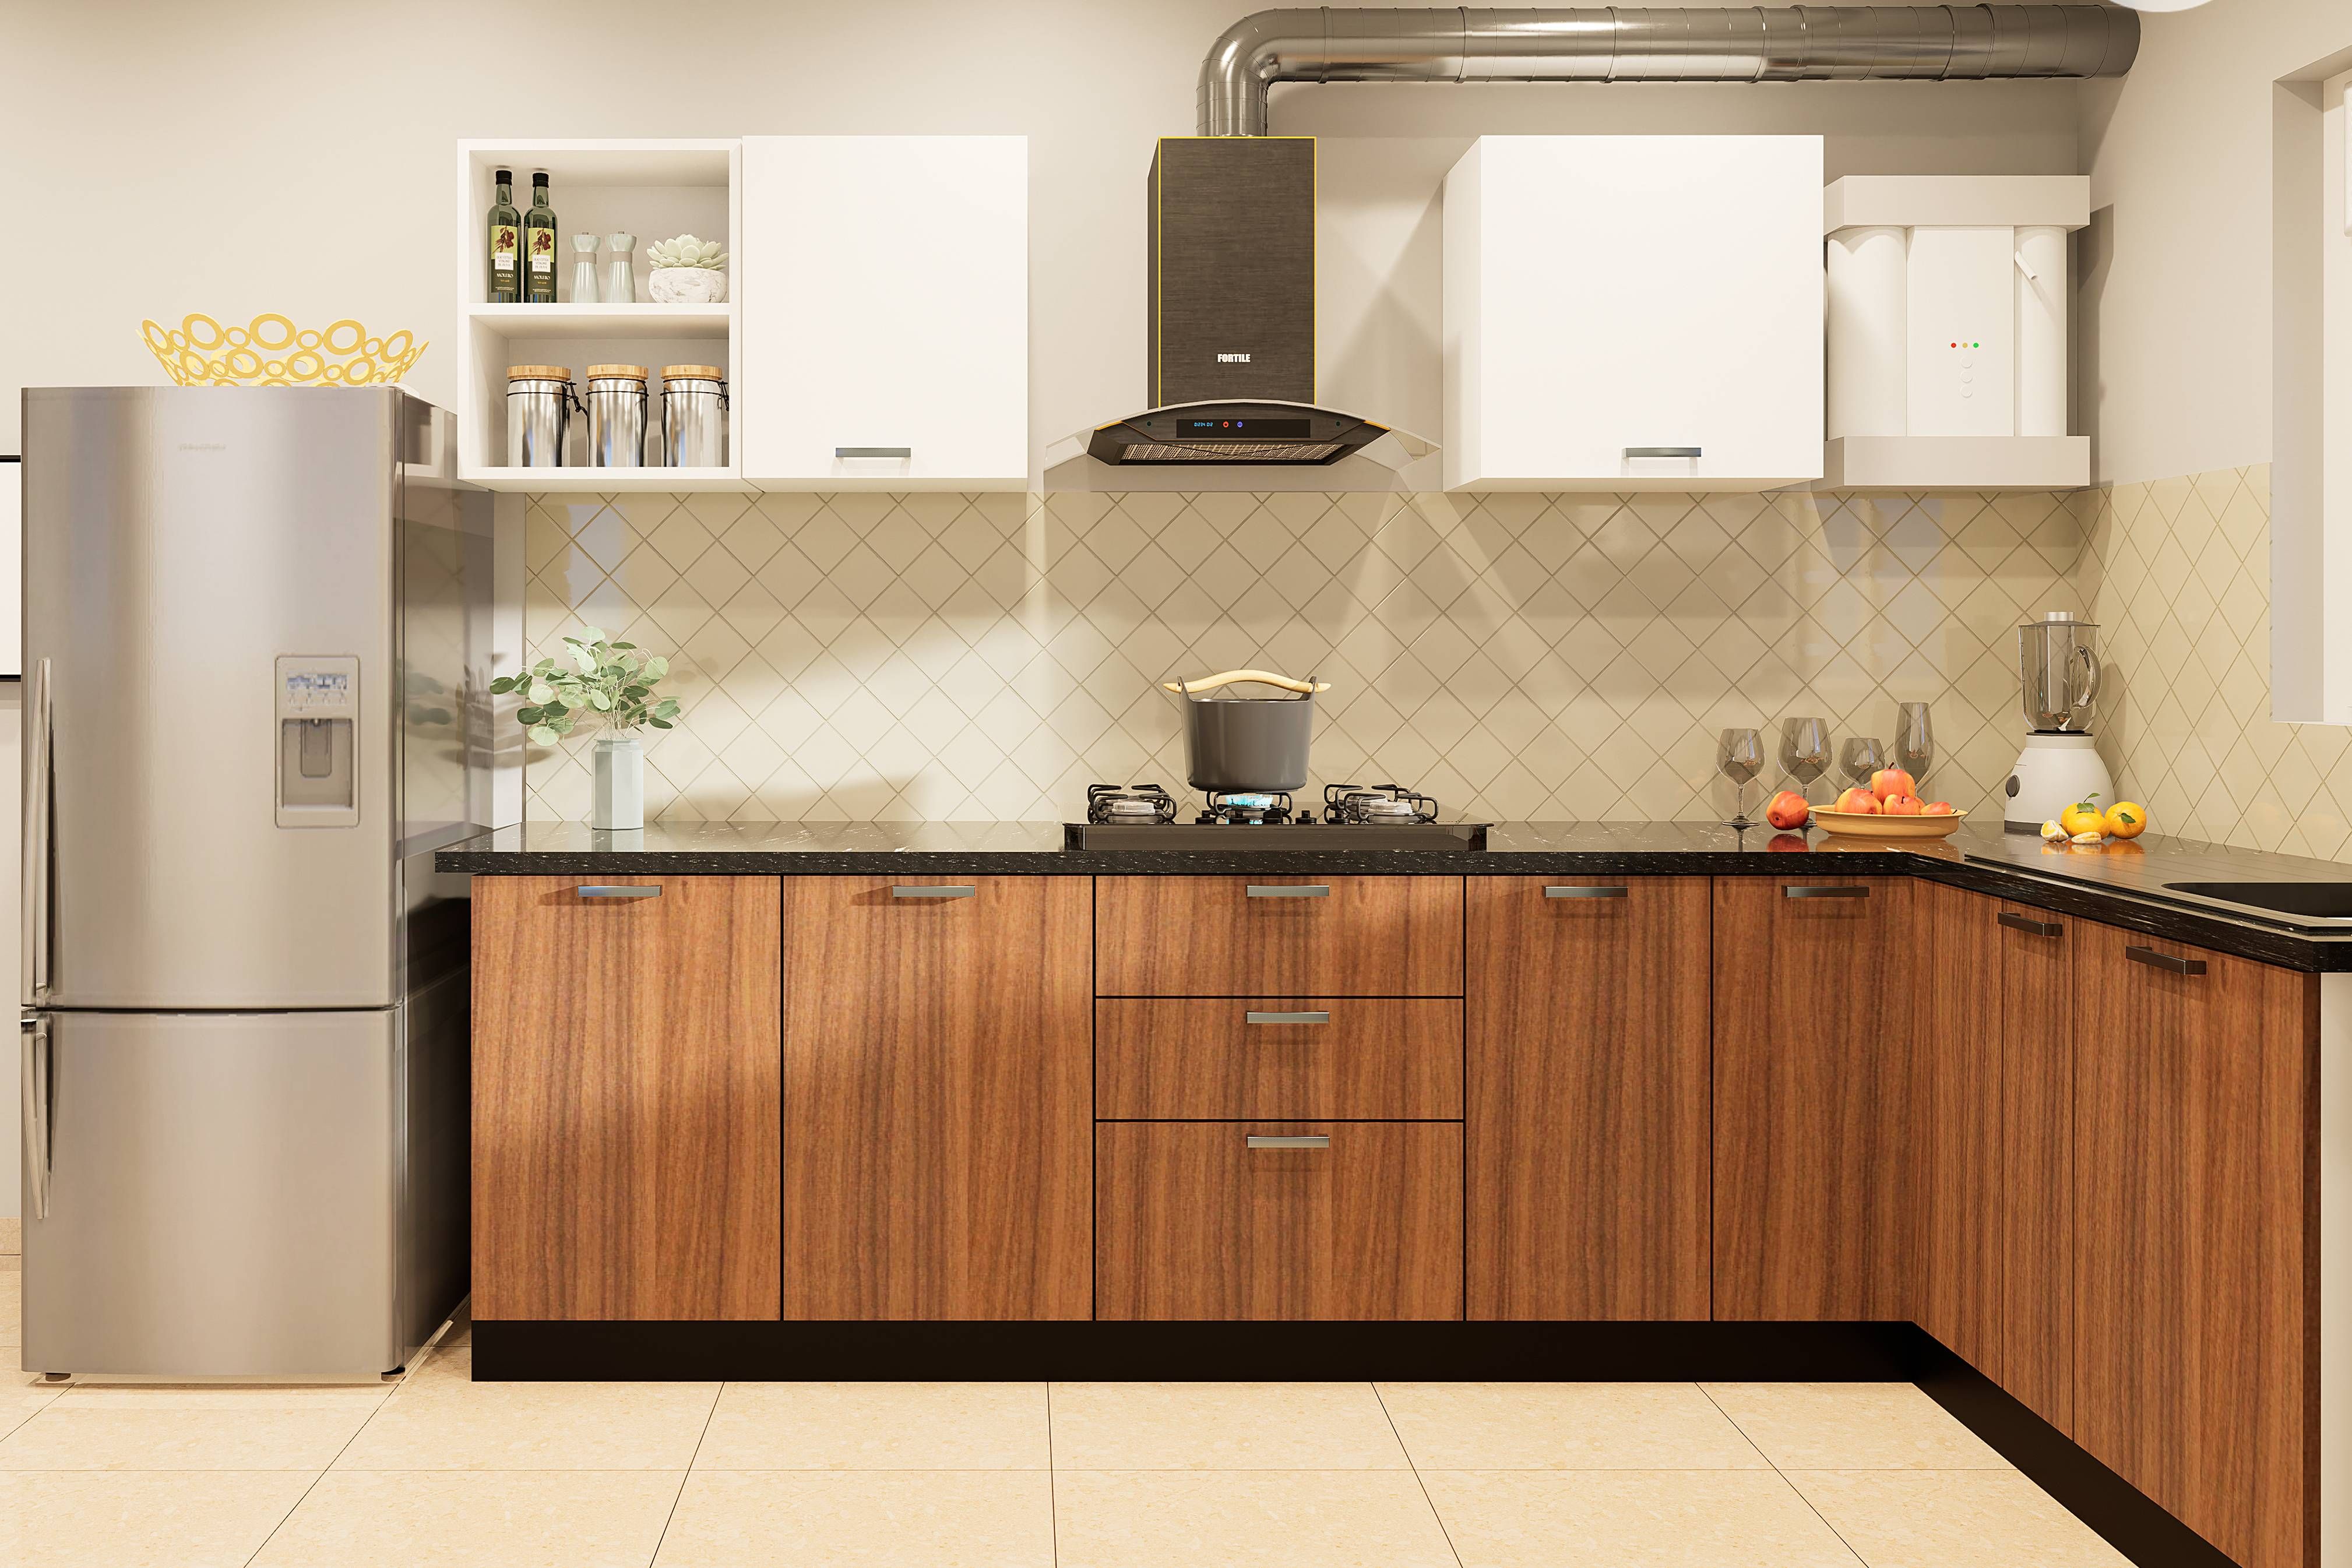 Contemporary L-Shaped Kitchen Design With Beige Dado Tiles